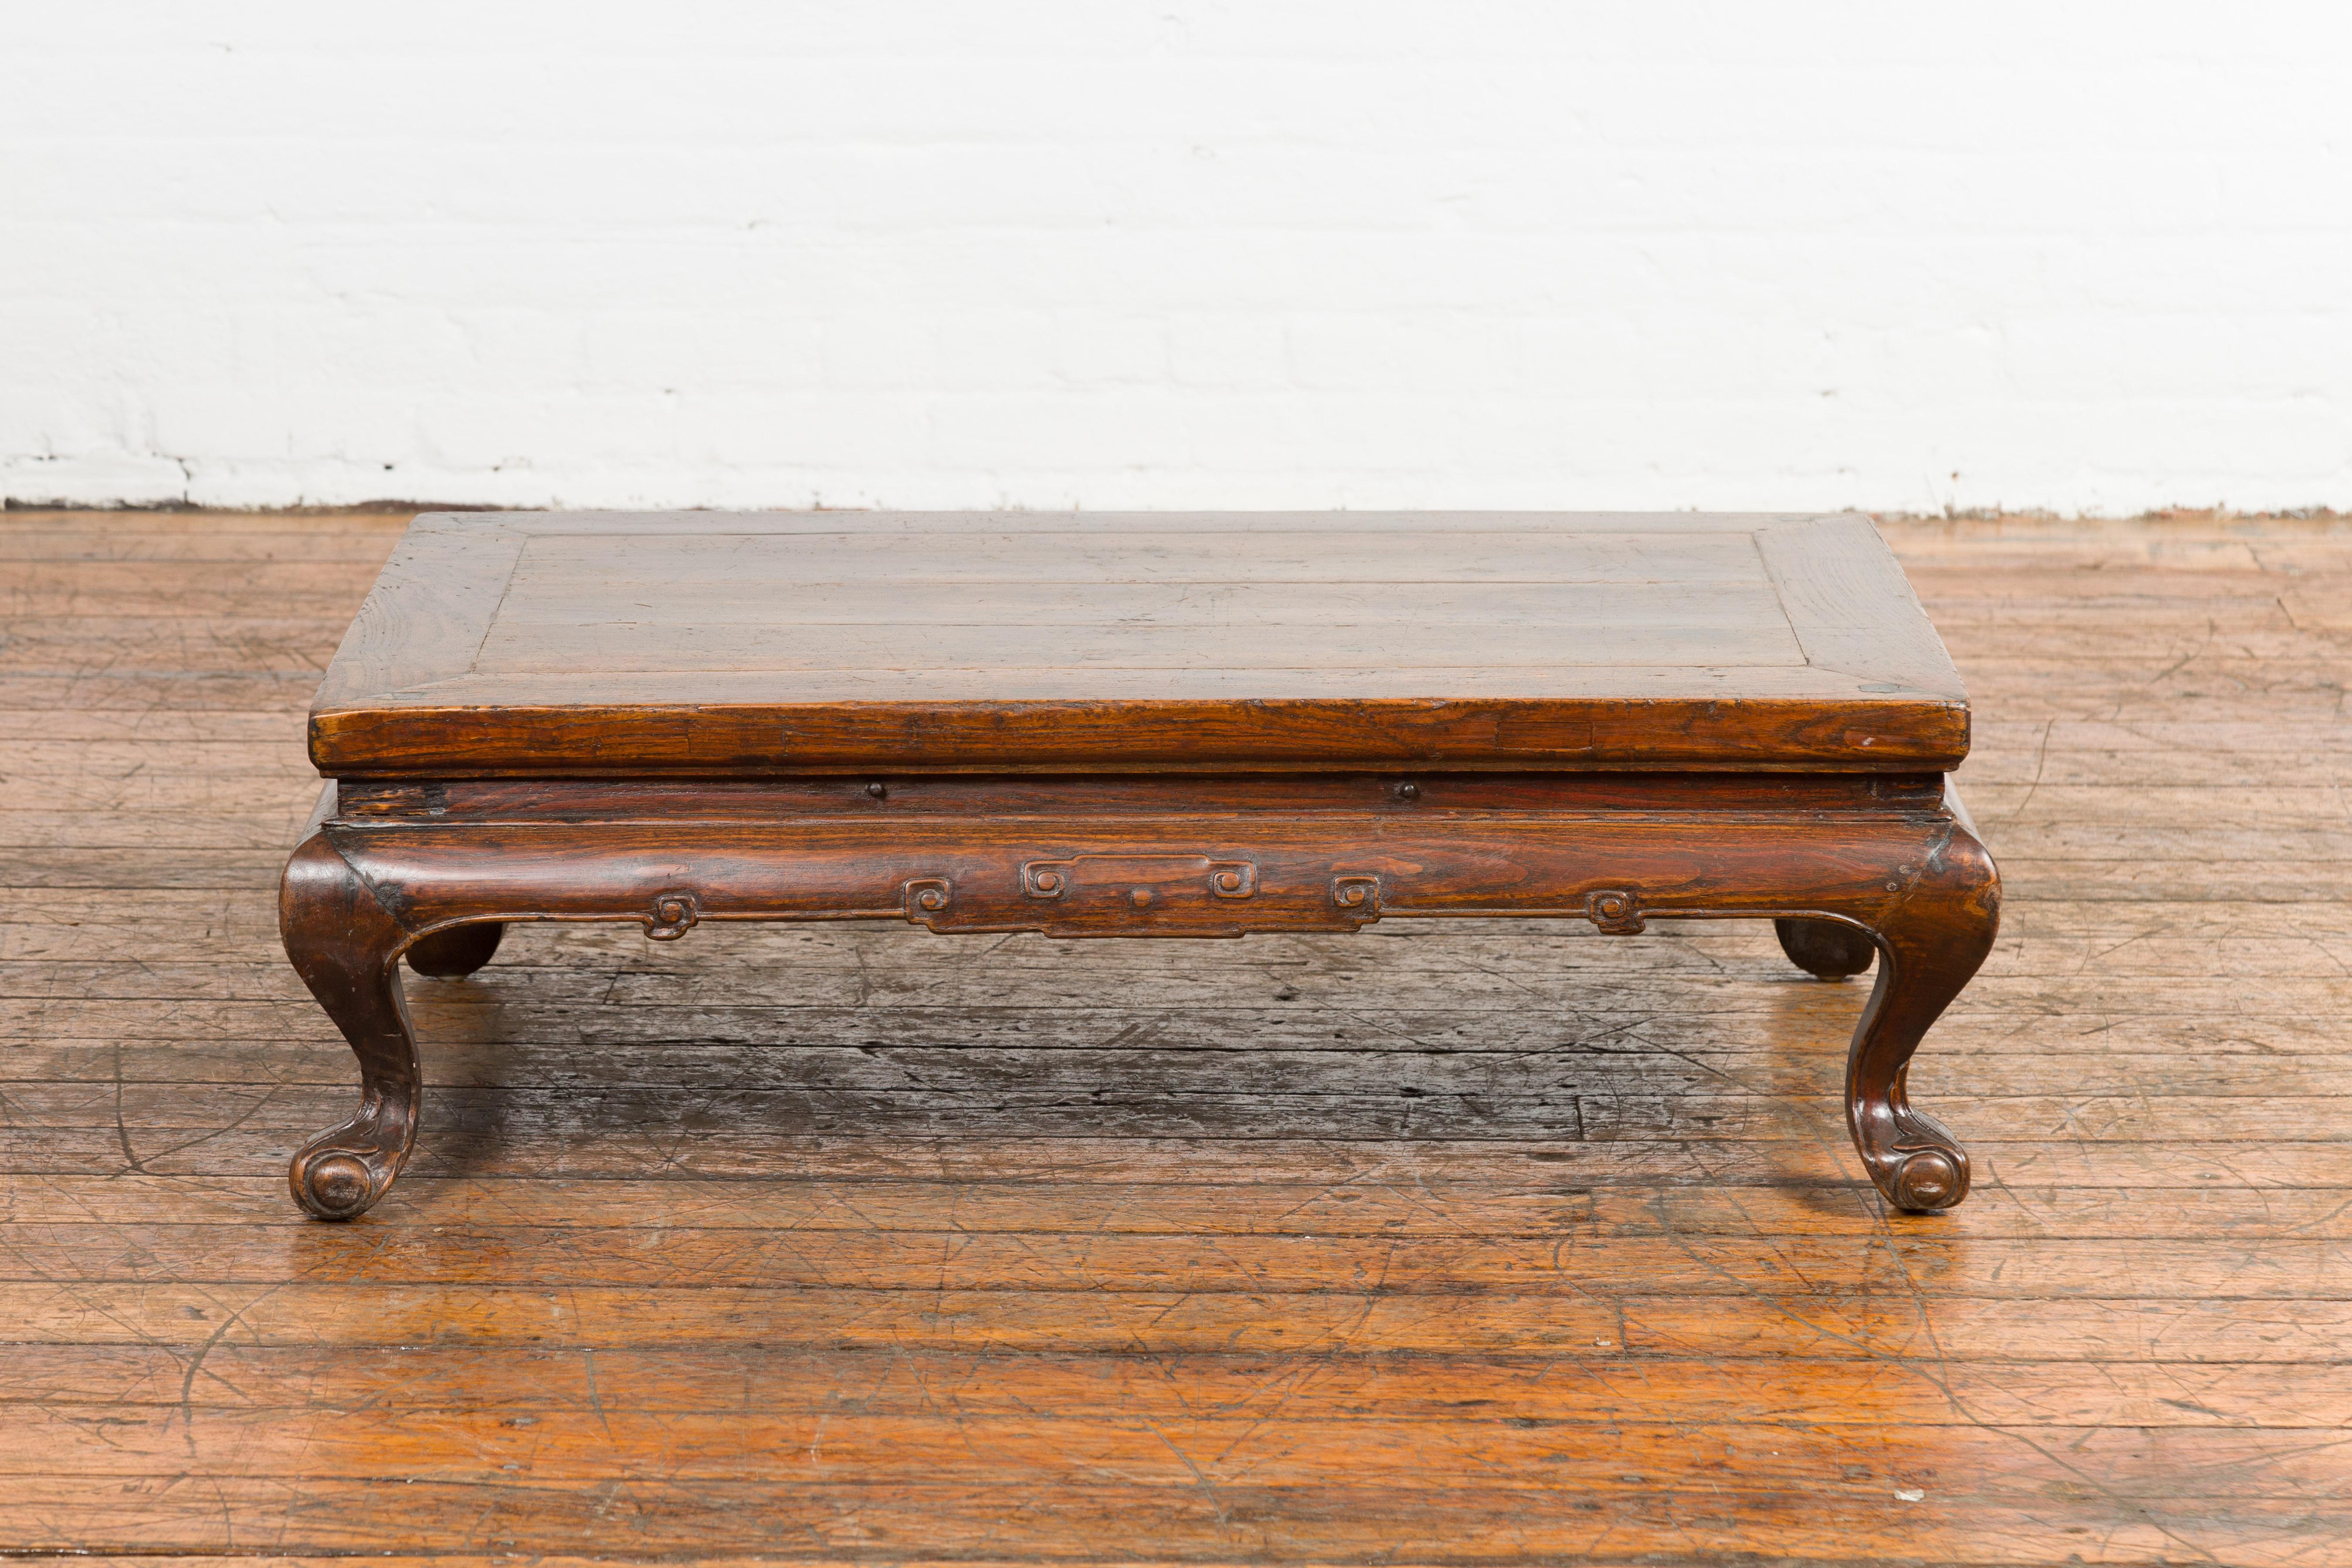 A Chinese late Qing Dynasty period low Kang coffee table from the early 20th century, with carved apron and cabriole legs. Step into the world of antique Chinese craftsmanship with this coffee table, originating from the late Qing Dynasty period in